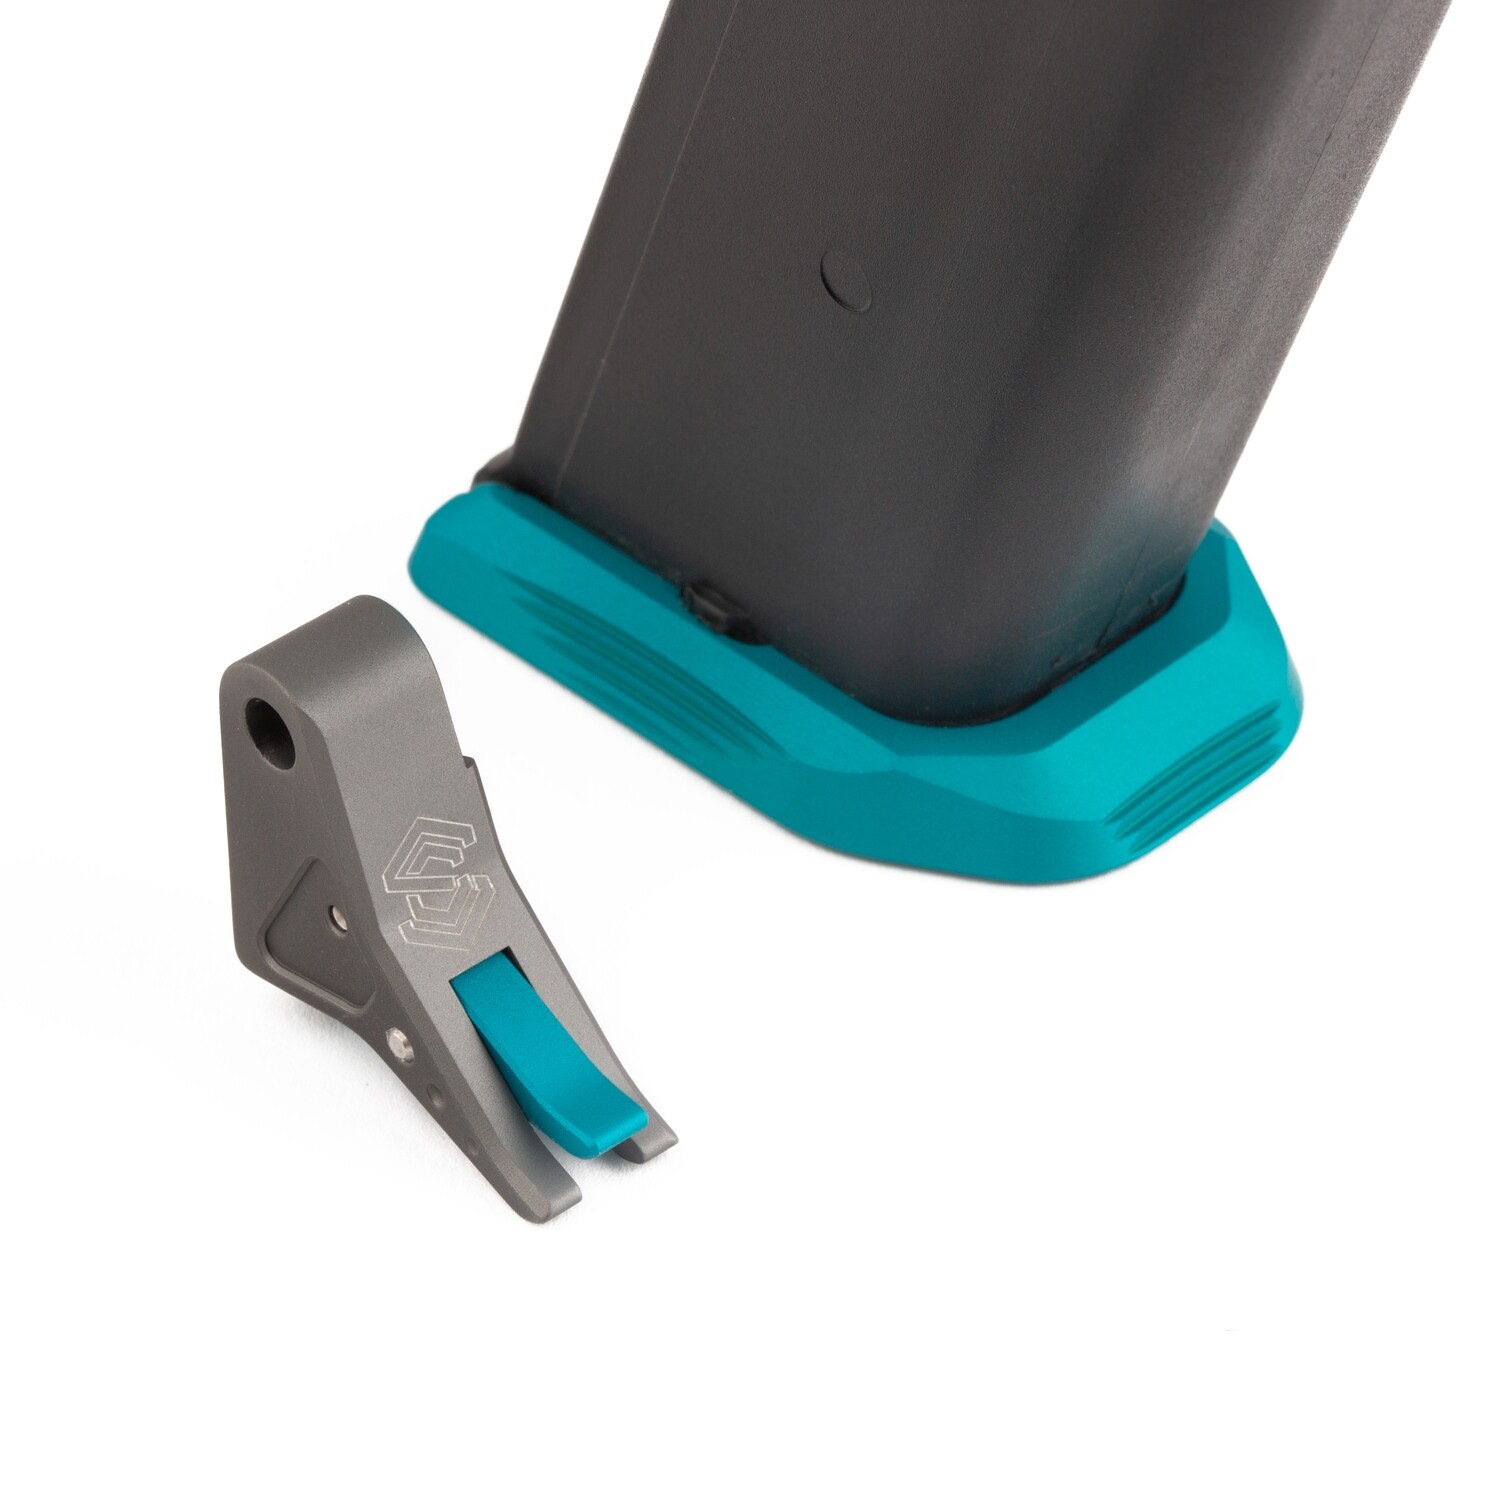 "SAGISI SQUEEZY" Trigger/Basepad Combo (Grey Shoe/Teal Safety)